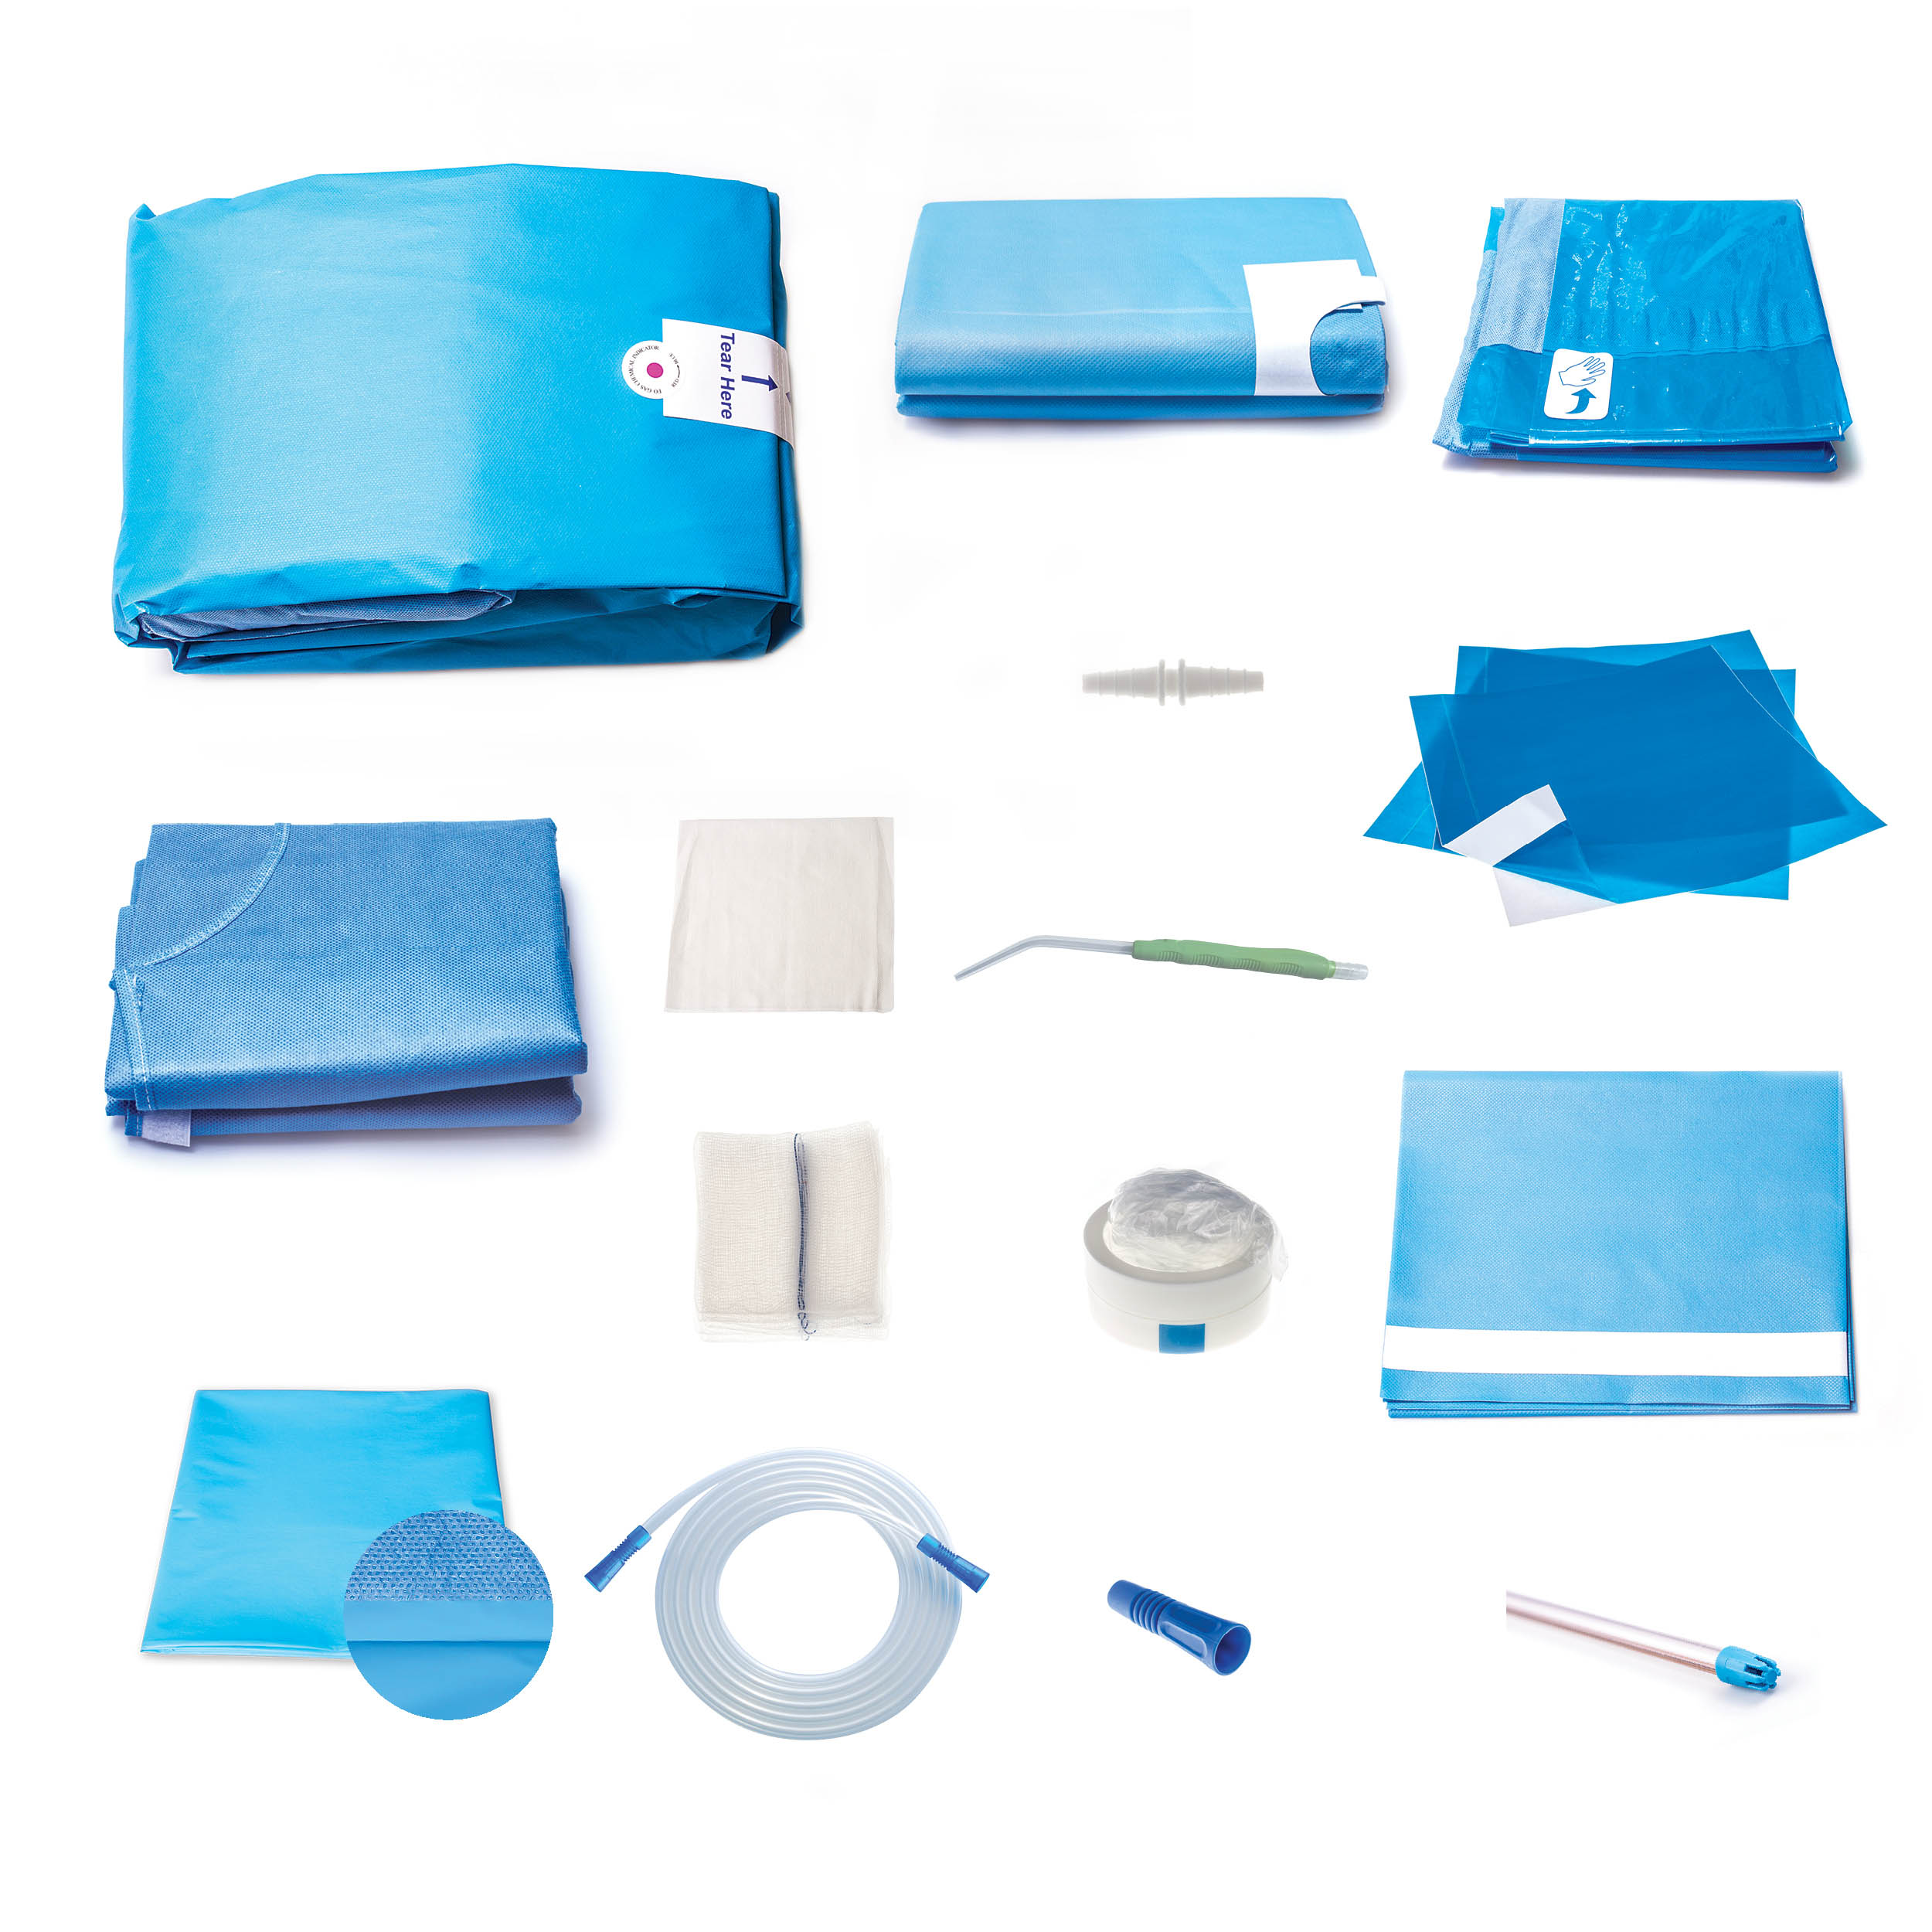 Standard Implant and Oral Surgery Procedure Pack